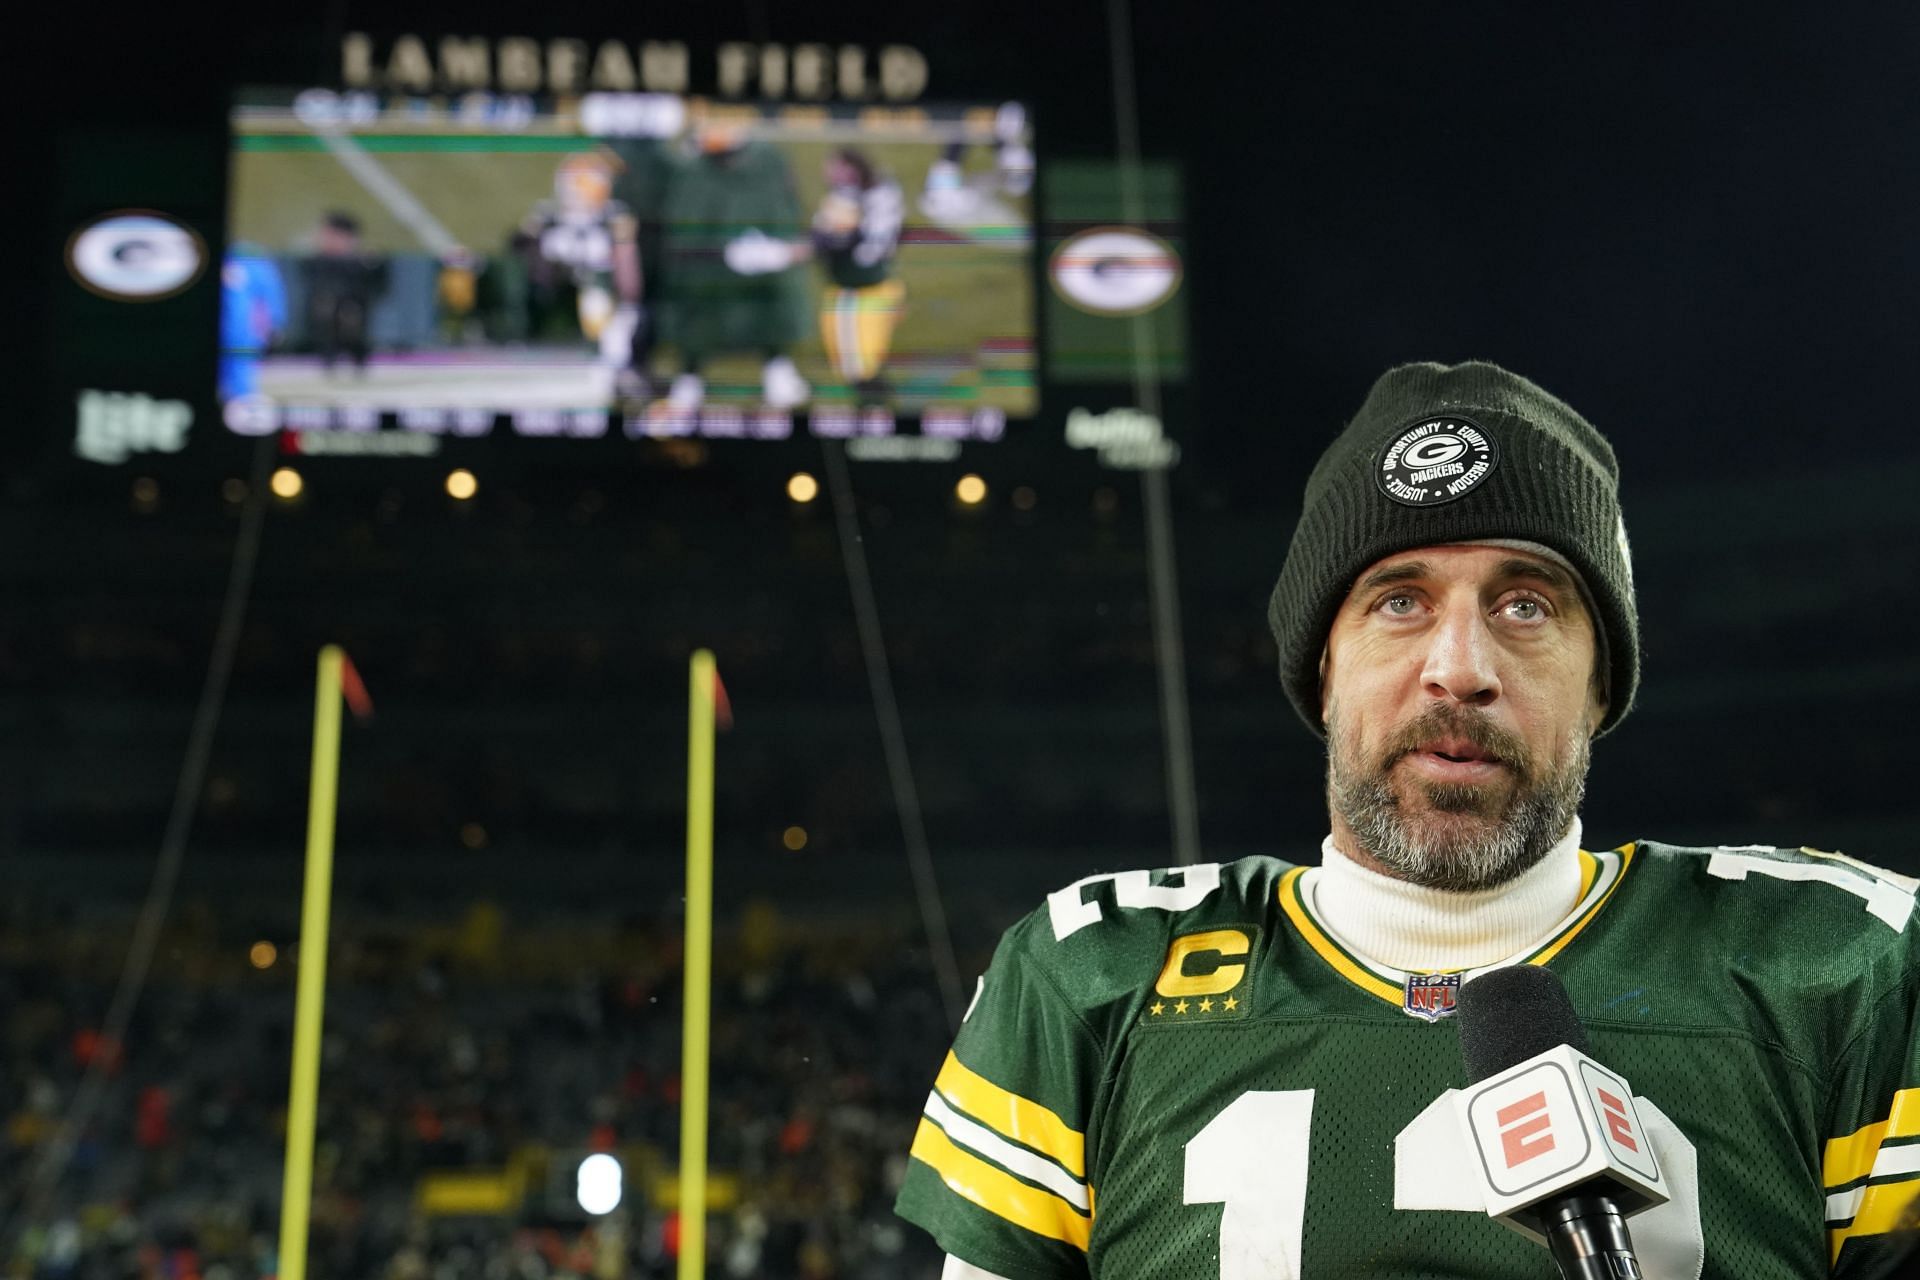 What will the Jets do to help Aaron Rodgers?